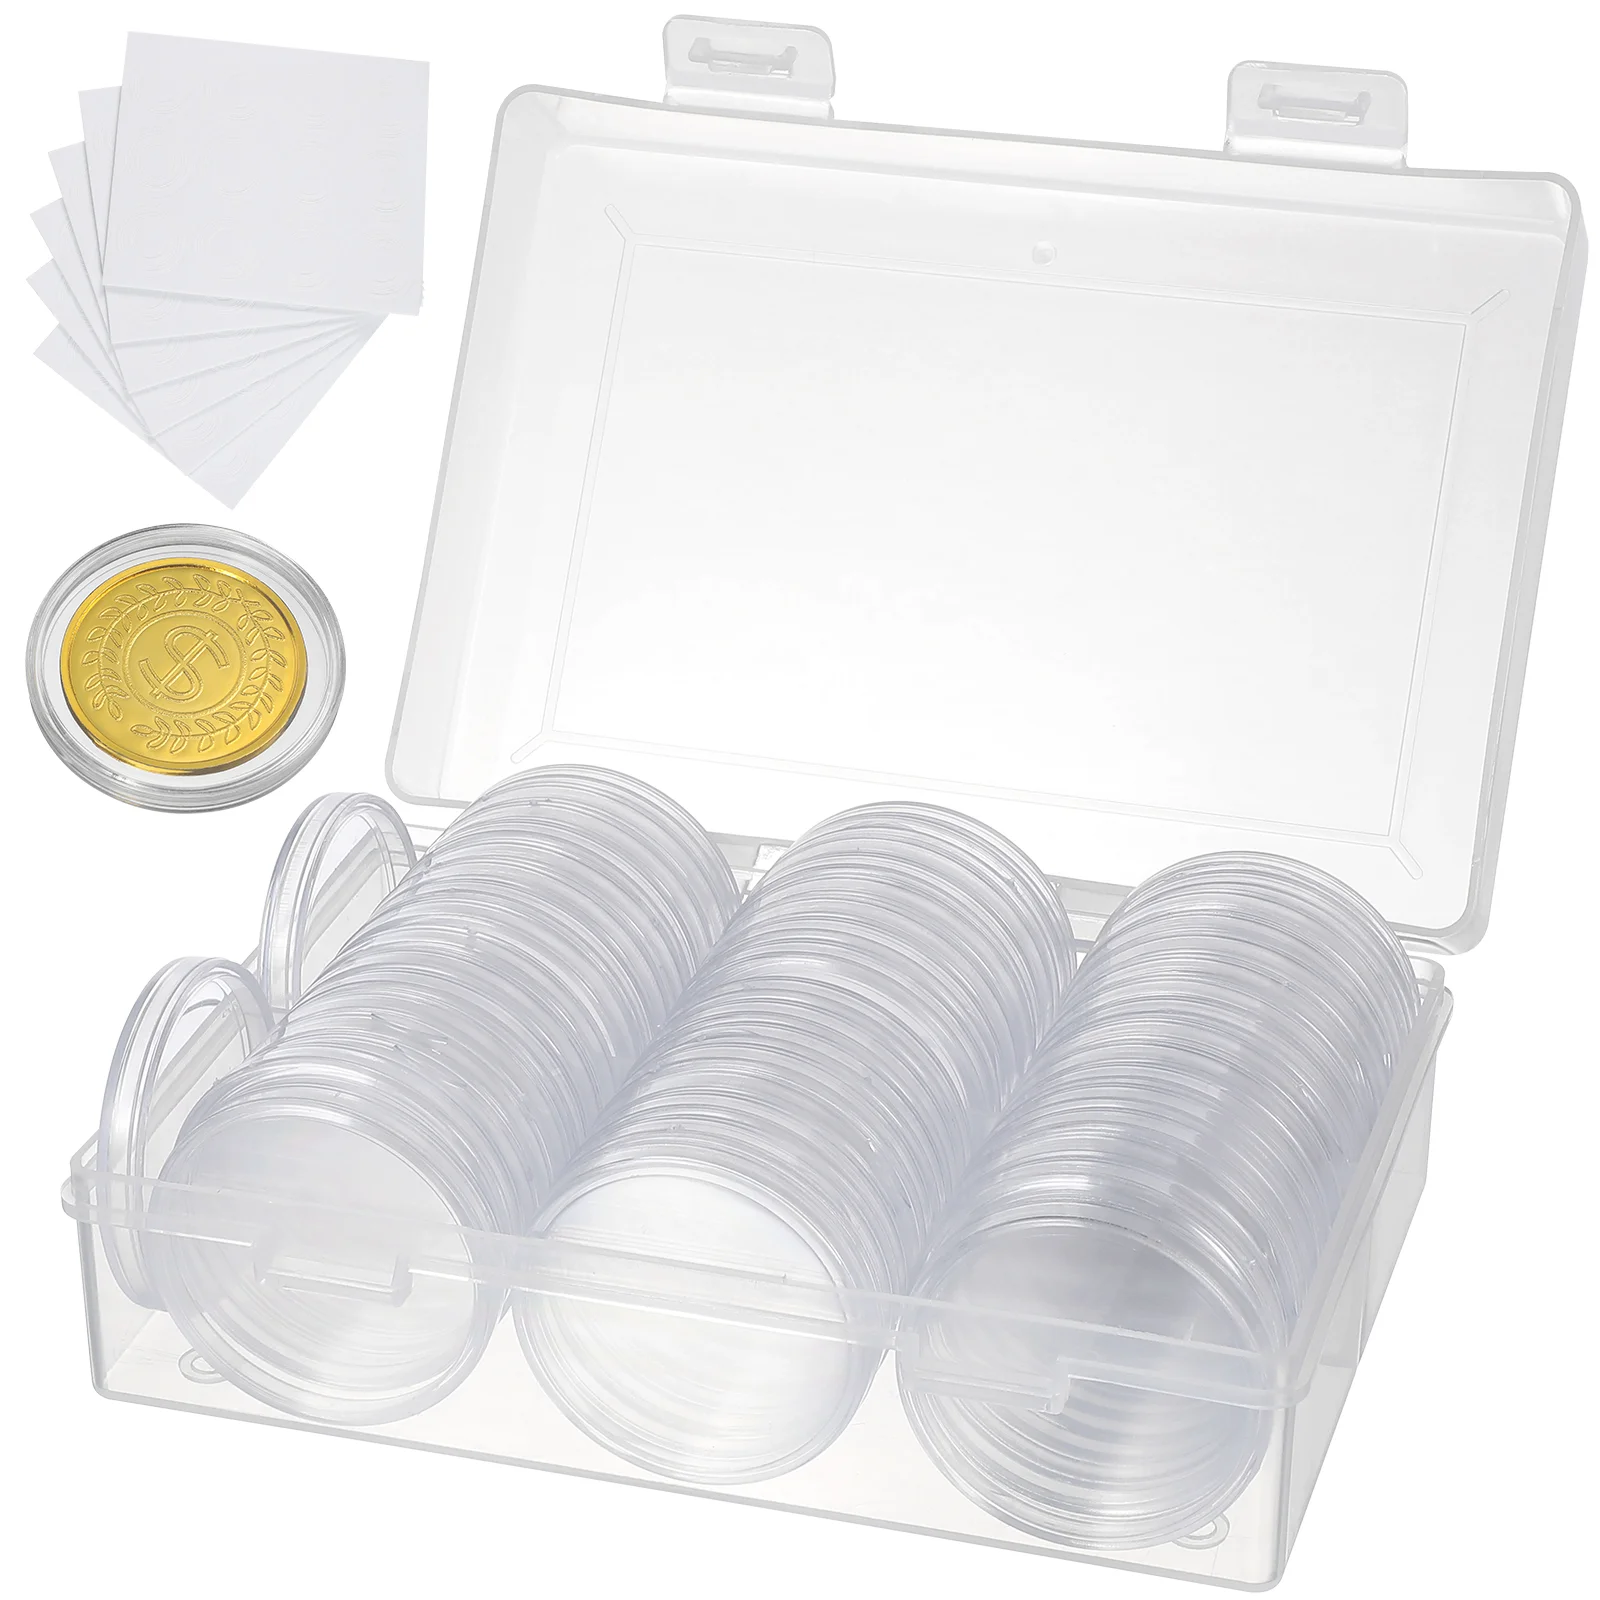 

Commemorative Coin Round Box Storage (40mm 100 Pieces) Collecting Case Plastic Holders for Collectors Clear Coins